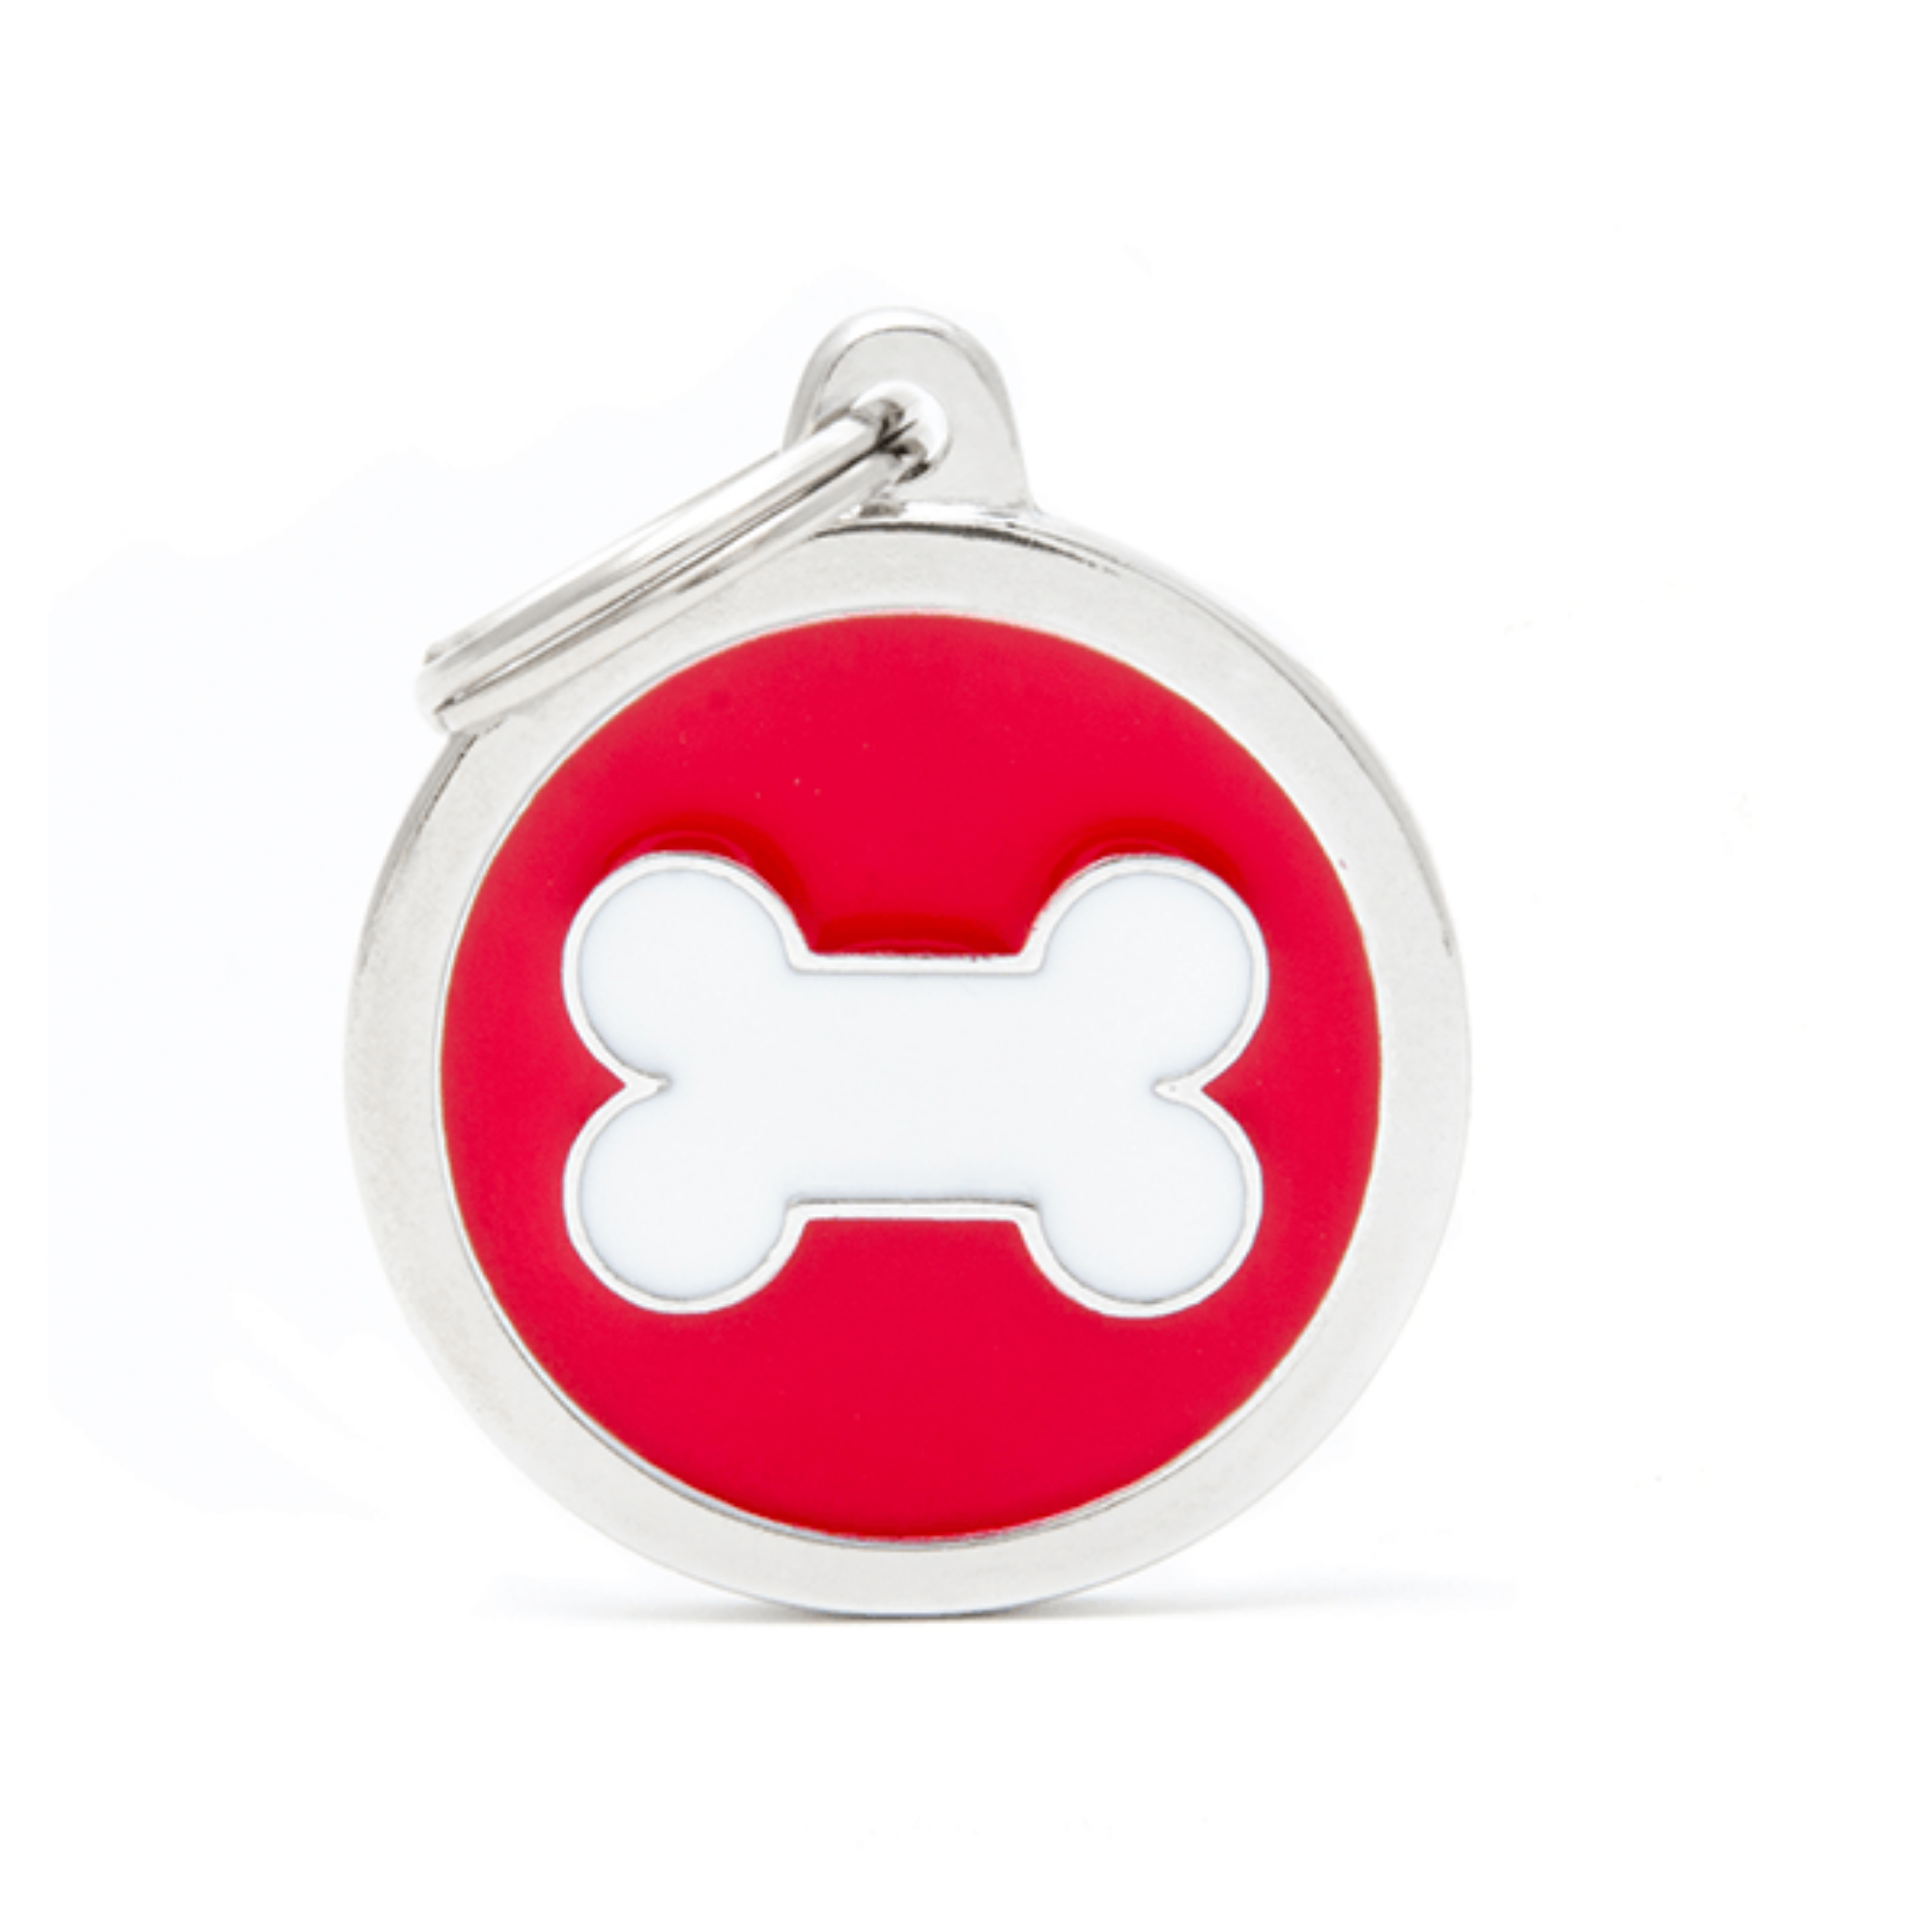 MyFamily Circle Bone Tag Red - Mutts & Co.